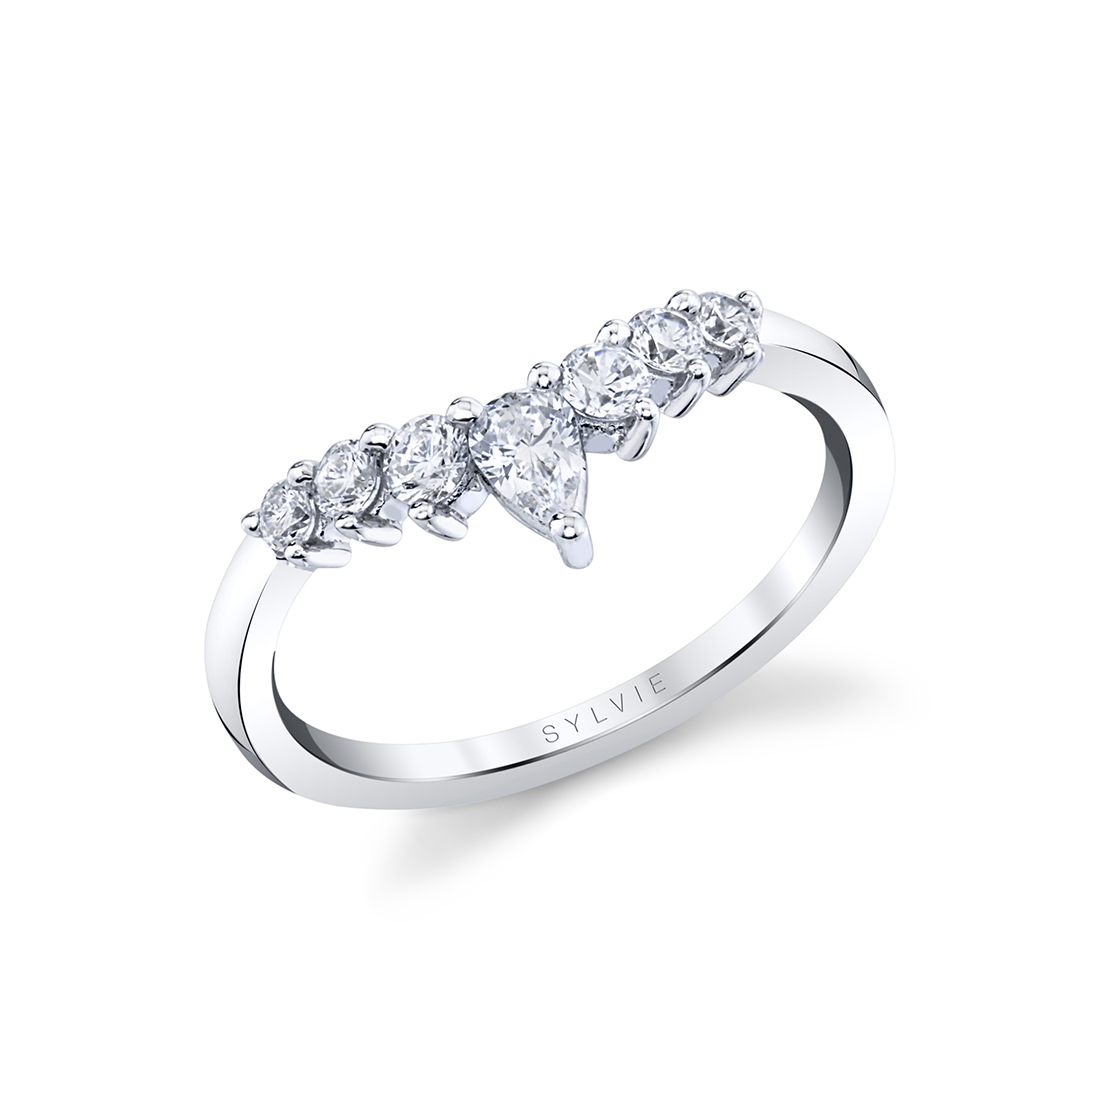 curved diamond wedding band in white gold